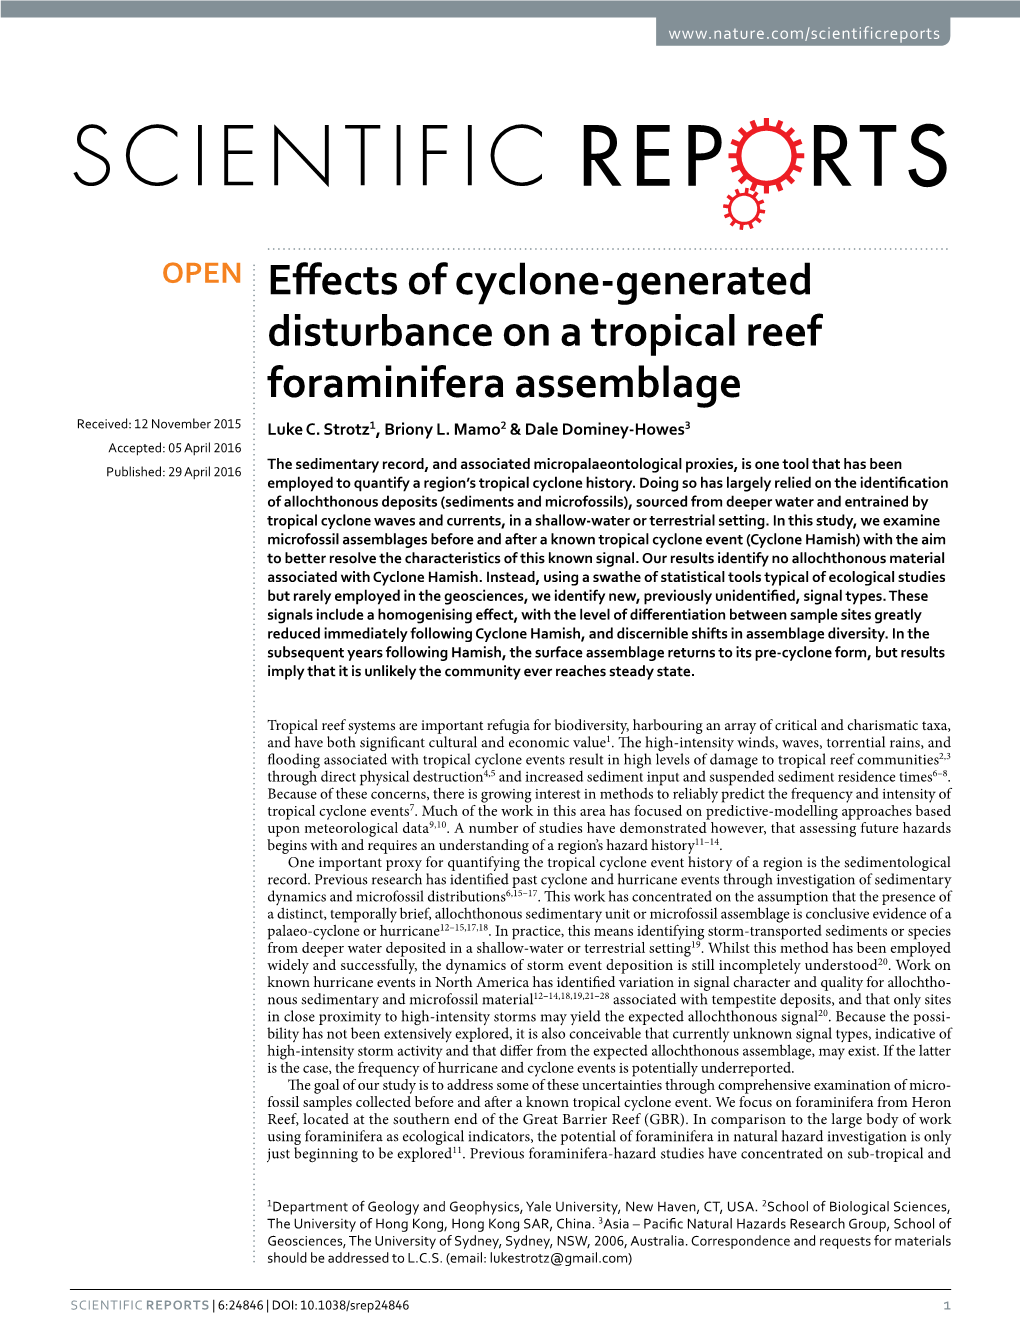 Effects of Cyclone-Generated Disturbance on a Tropical Reef Foraminifera Assemblage Received: 12 November 2015 Luke C